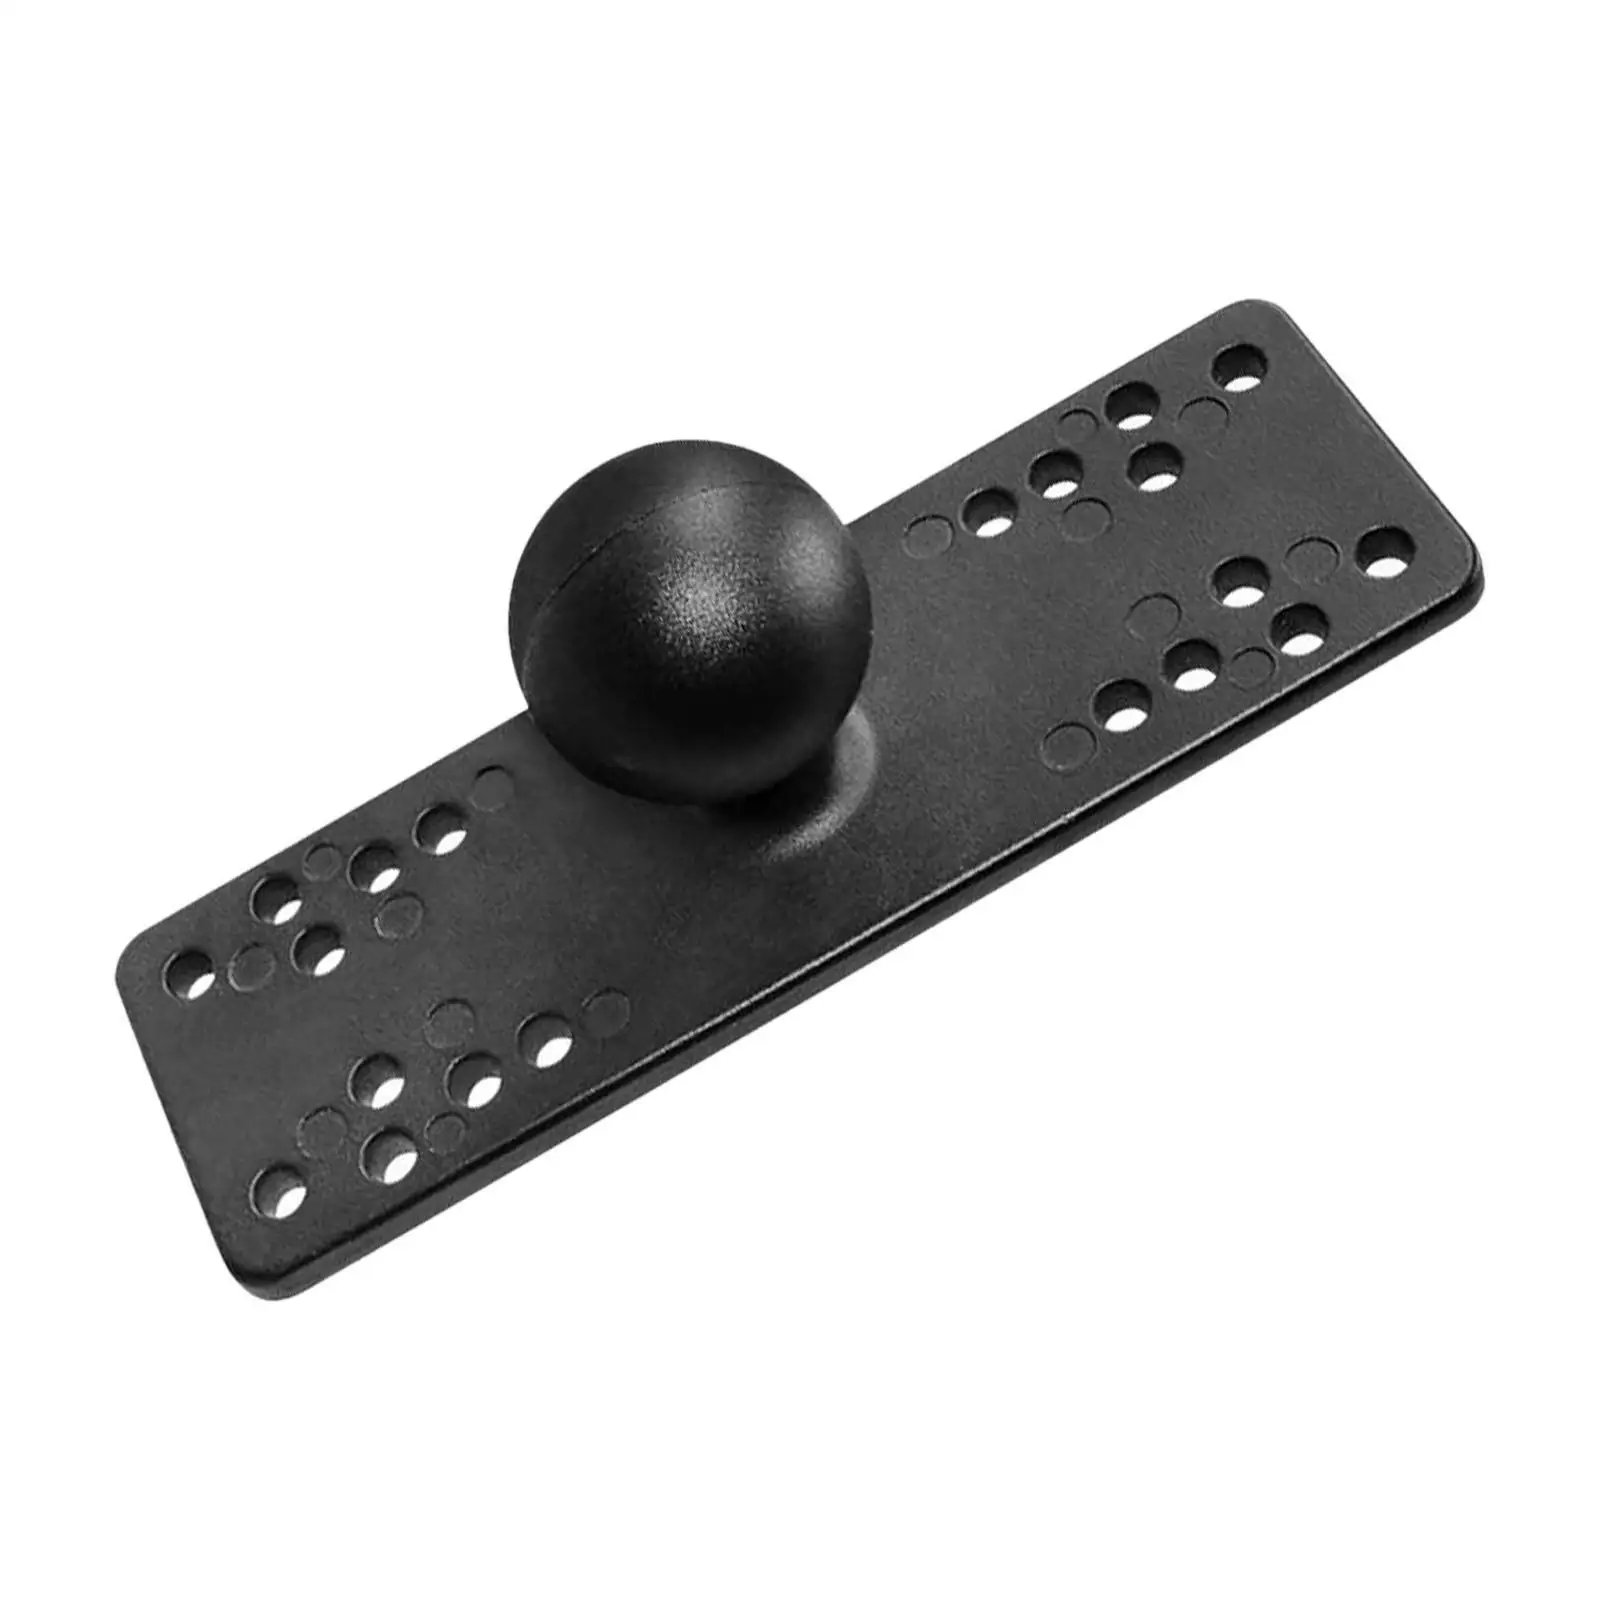 Marine Electronic Plate ,with 38.1mm/1.50inch Ball, Adjustable Angles ,Portable Marine Electronic Mount Kayak Supplies